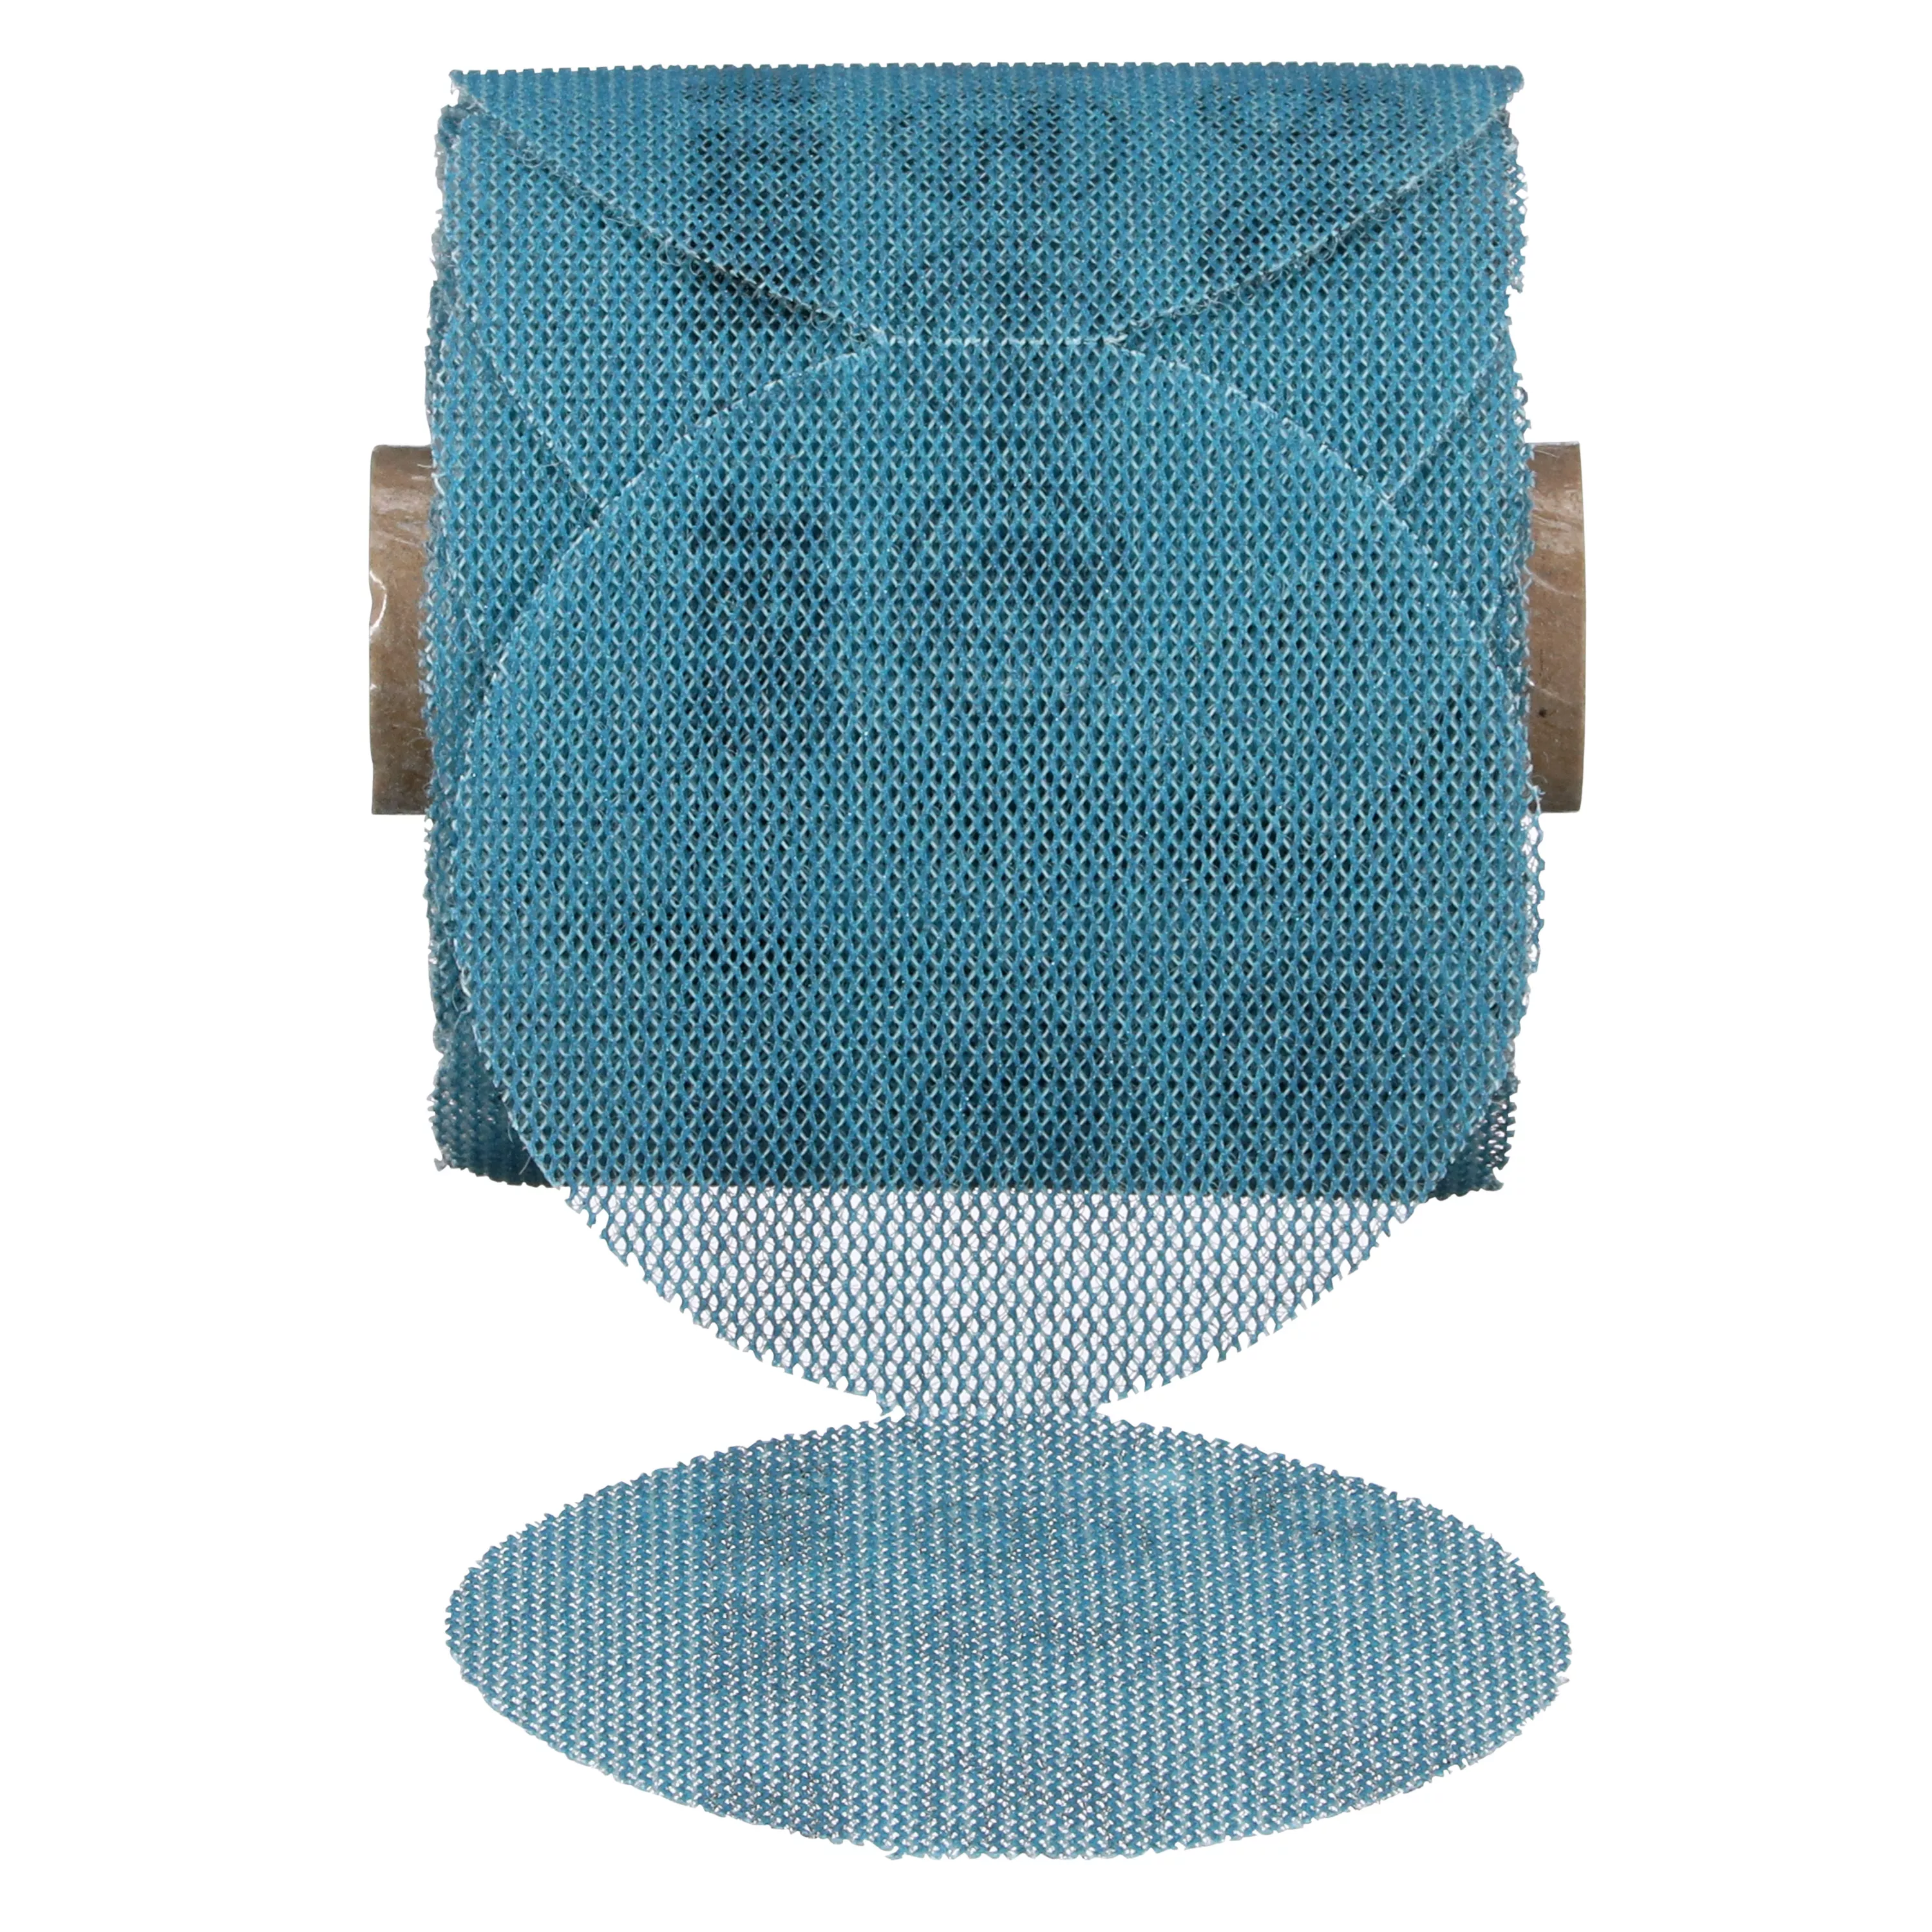 Product Number 310W | 3M™ Blue Net Disc Roll 36451